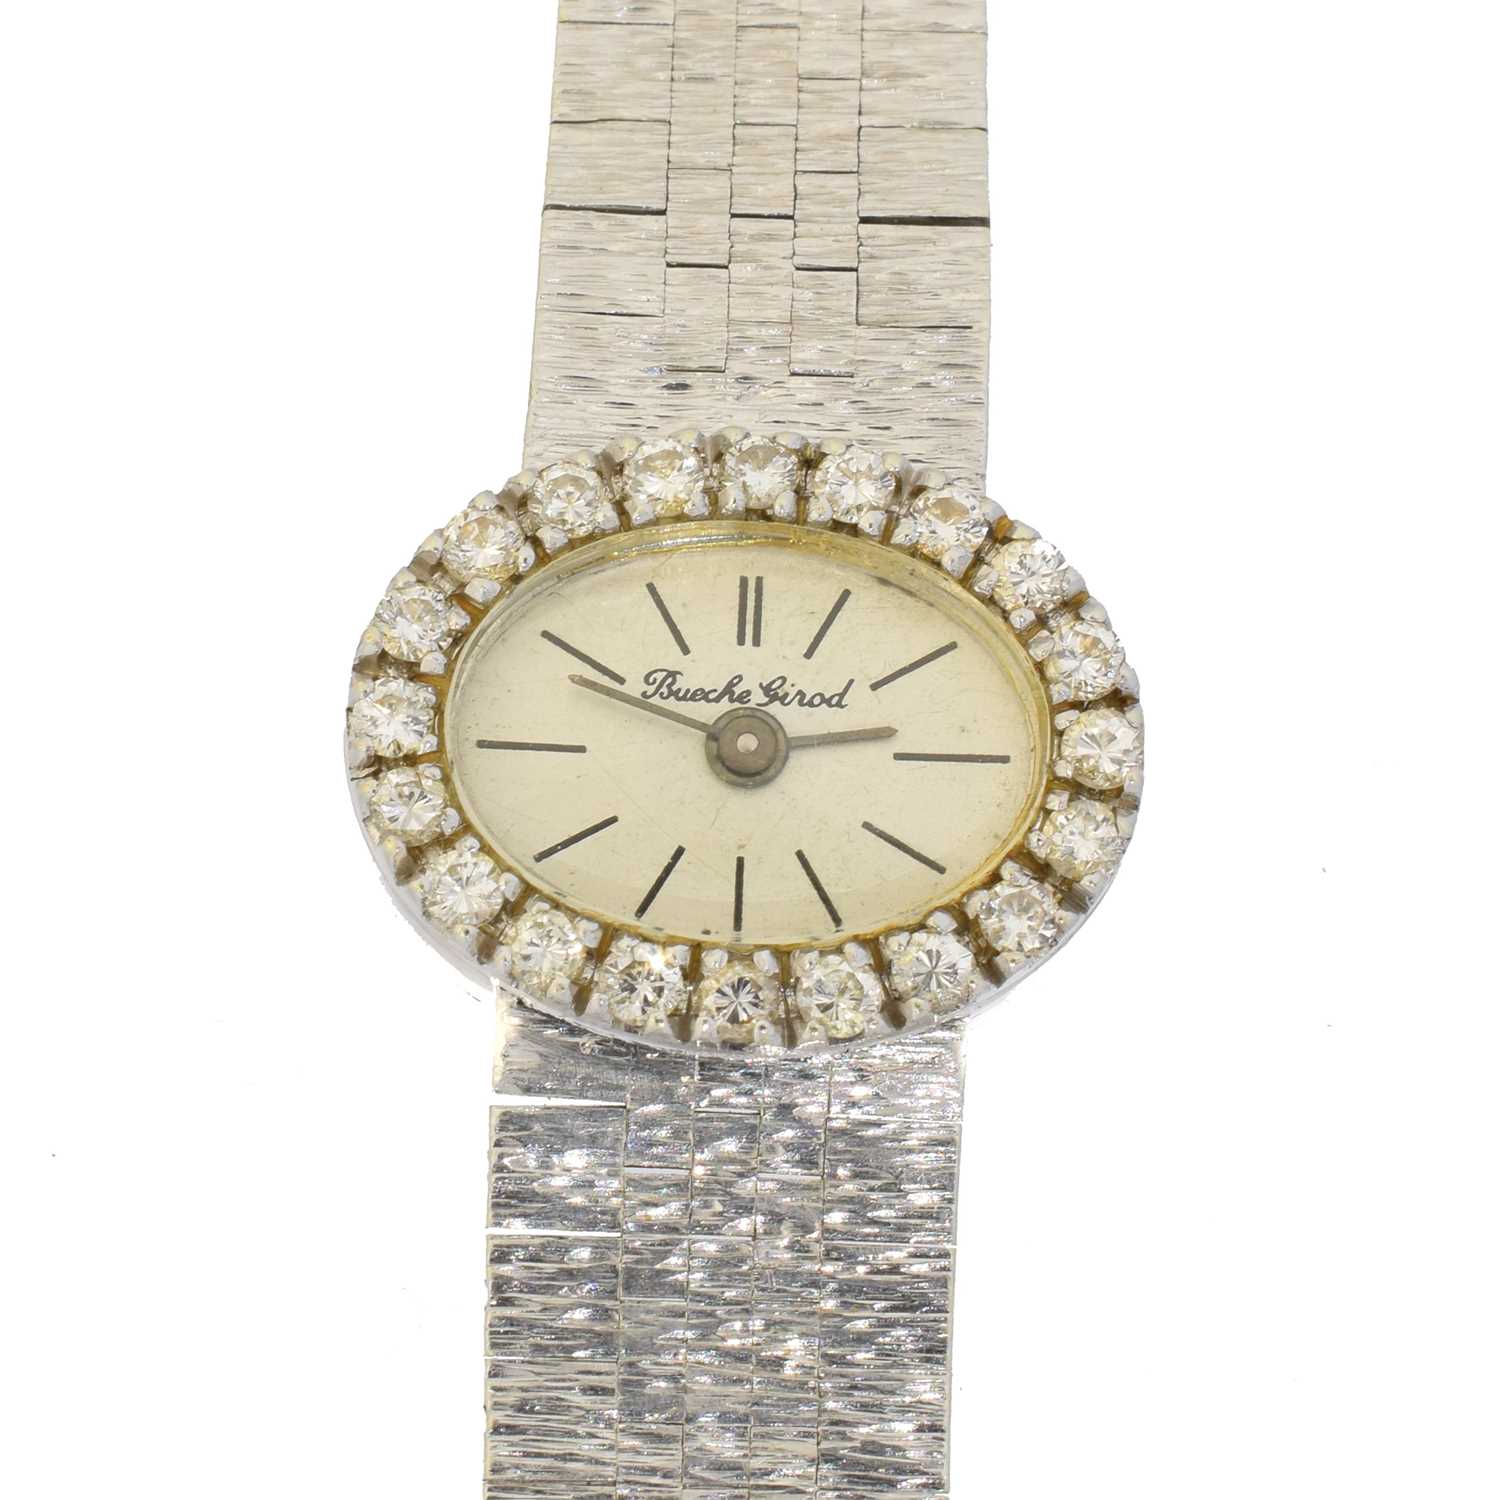 133 - A 1960s 9ct gold Bueche Girod cocktail watch,